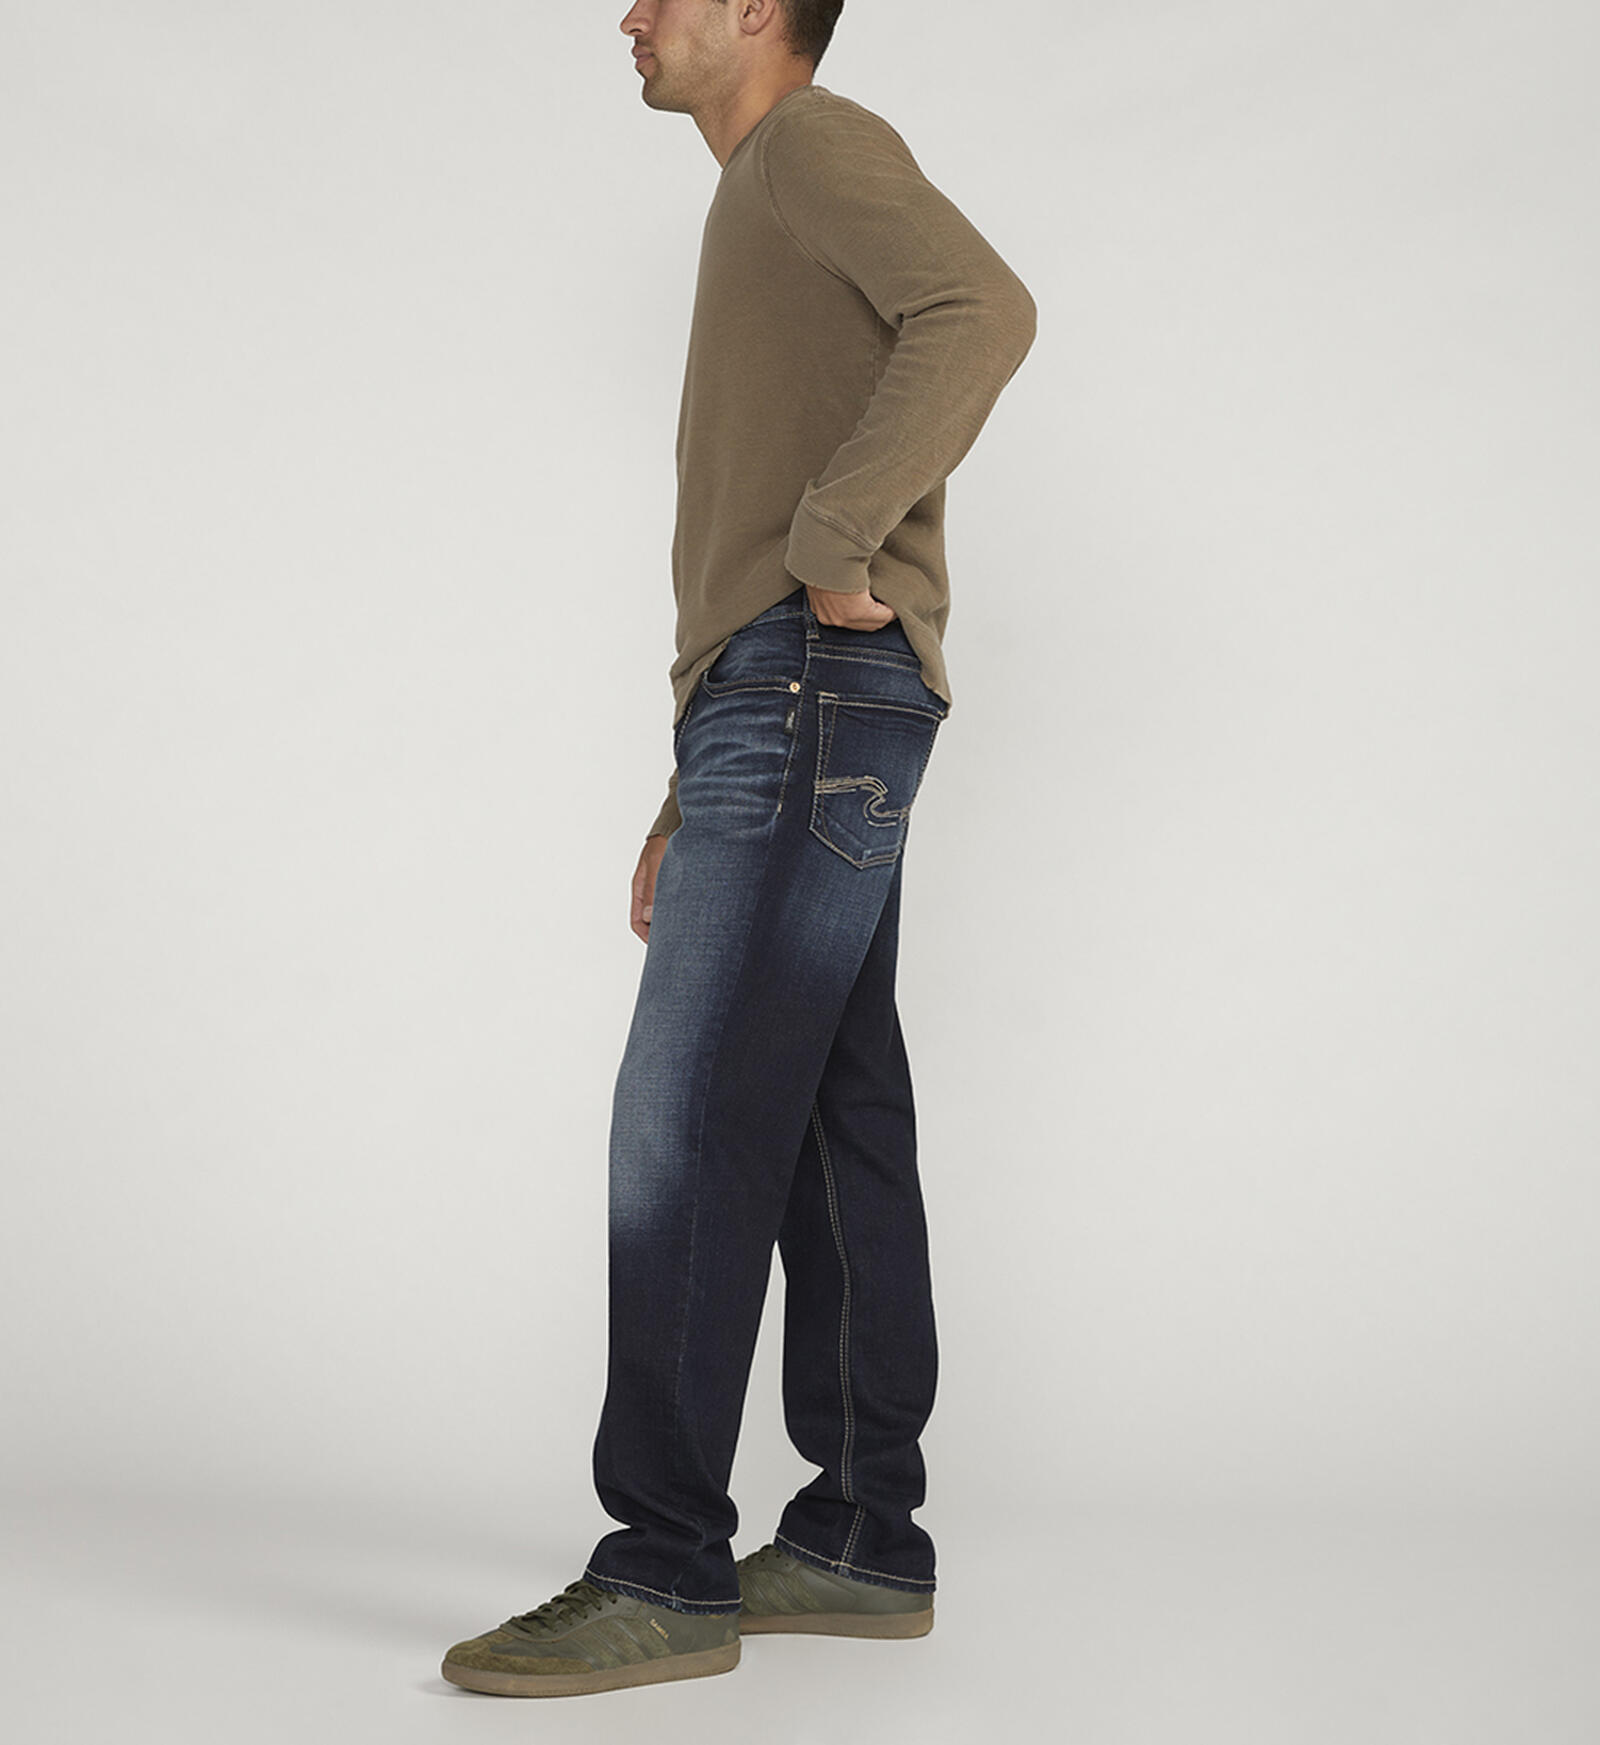 Buy Hunter Relaxed Athletic Fit Straight Leg Jeans for CAD 118.00